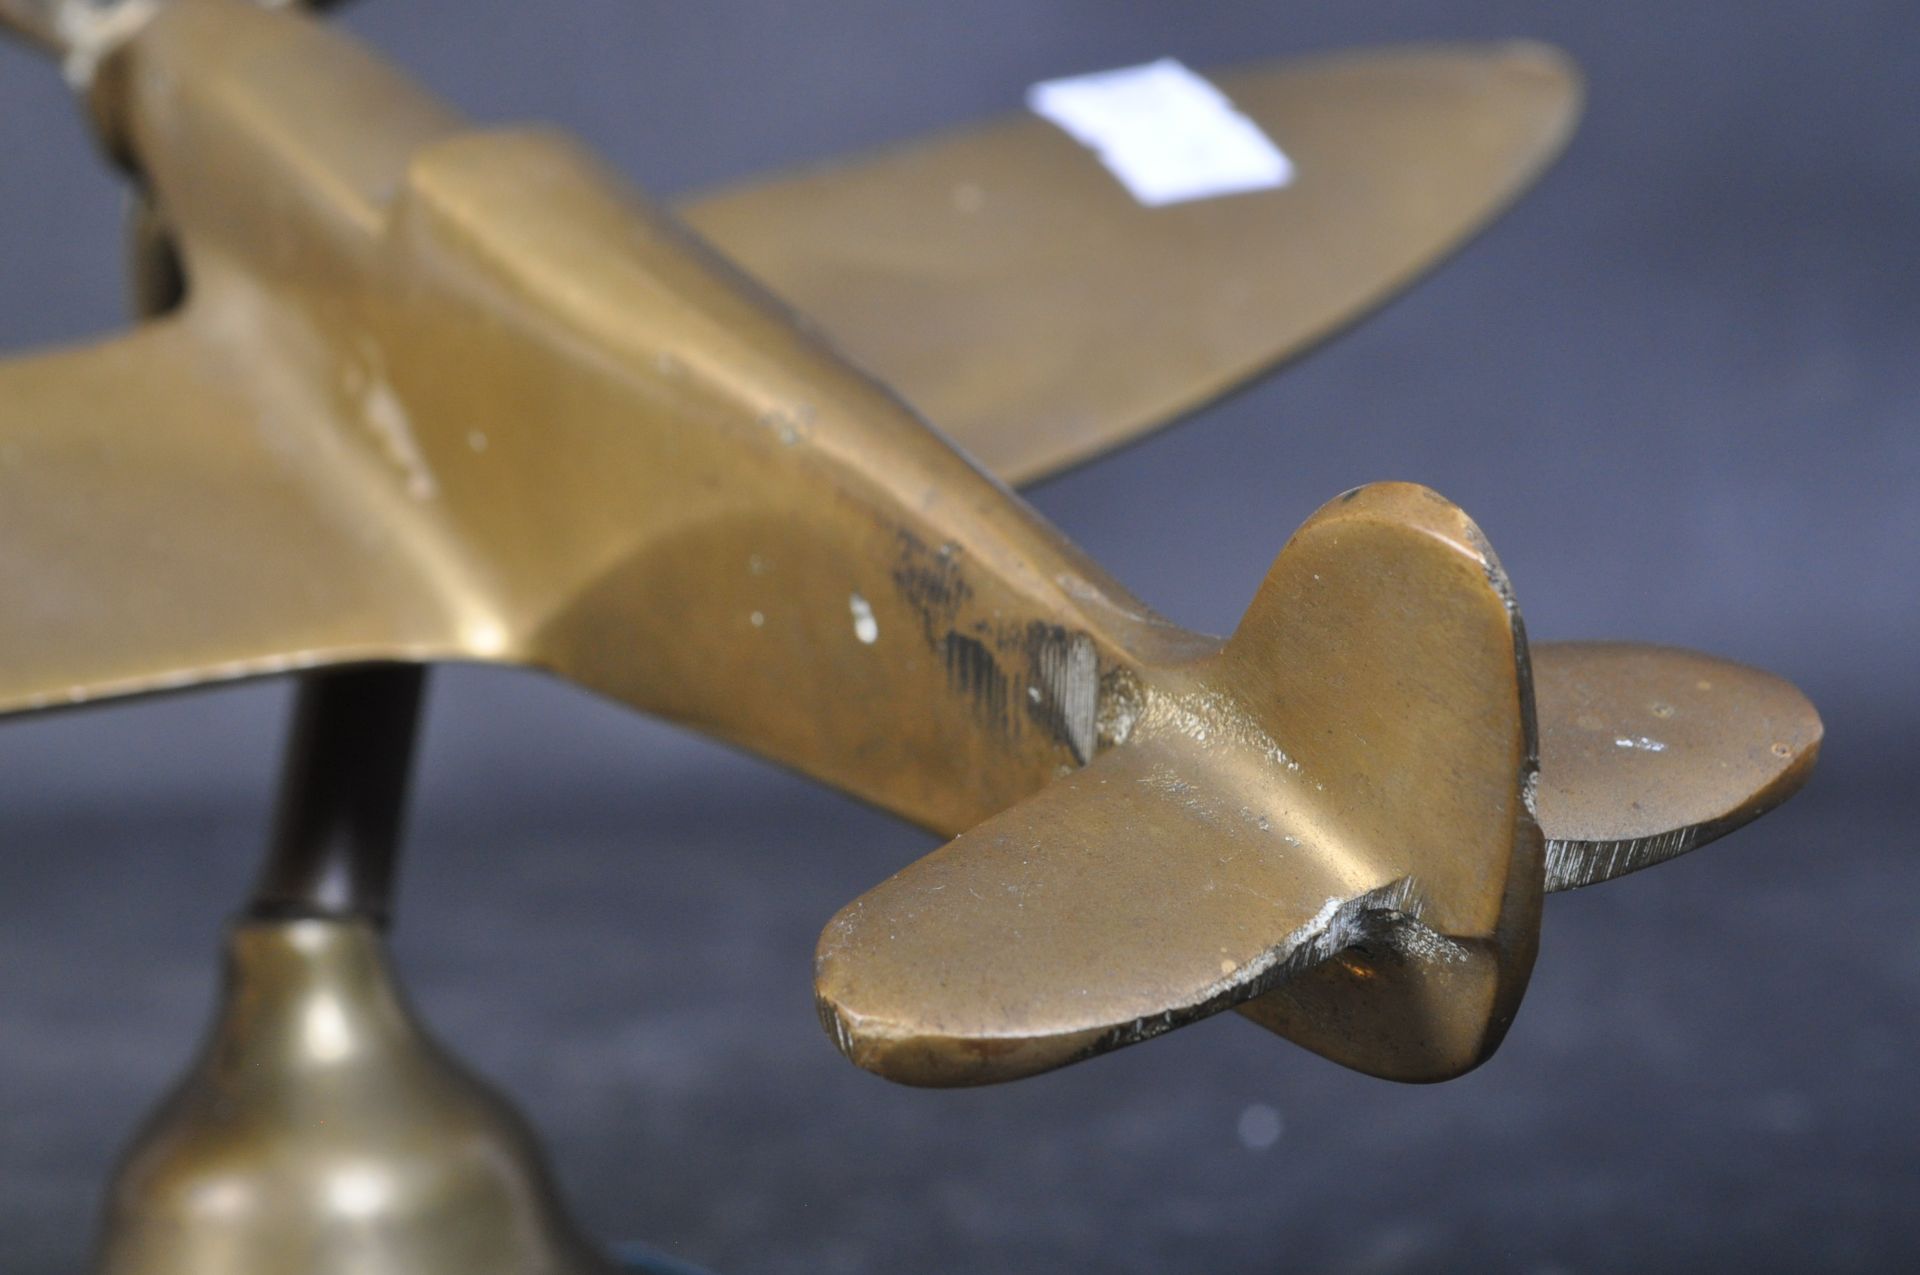 20TH CENTURY BRASS TRENCH ART SPITFIRE ORNAMENT - Image 5 of 5